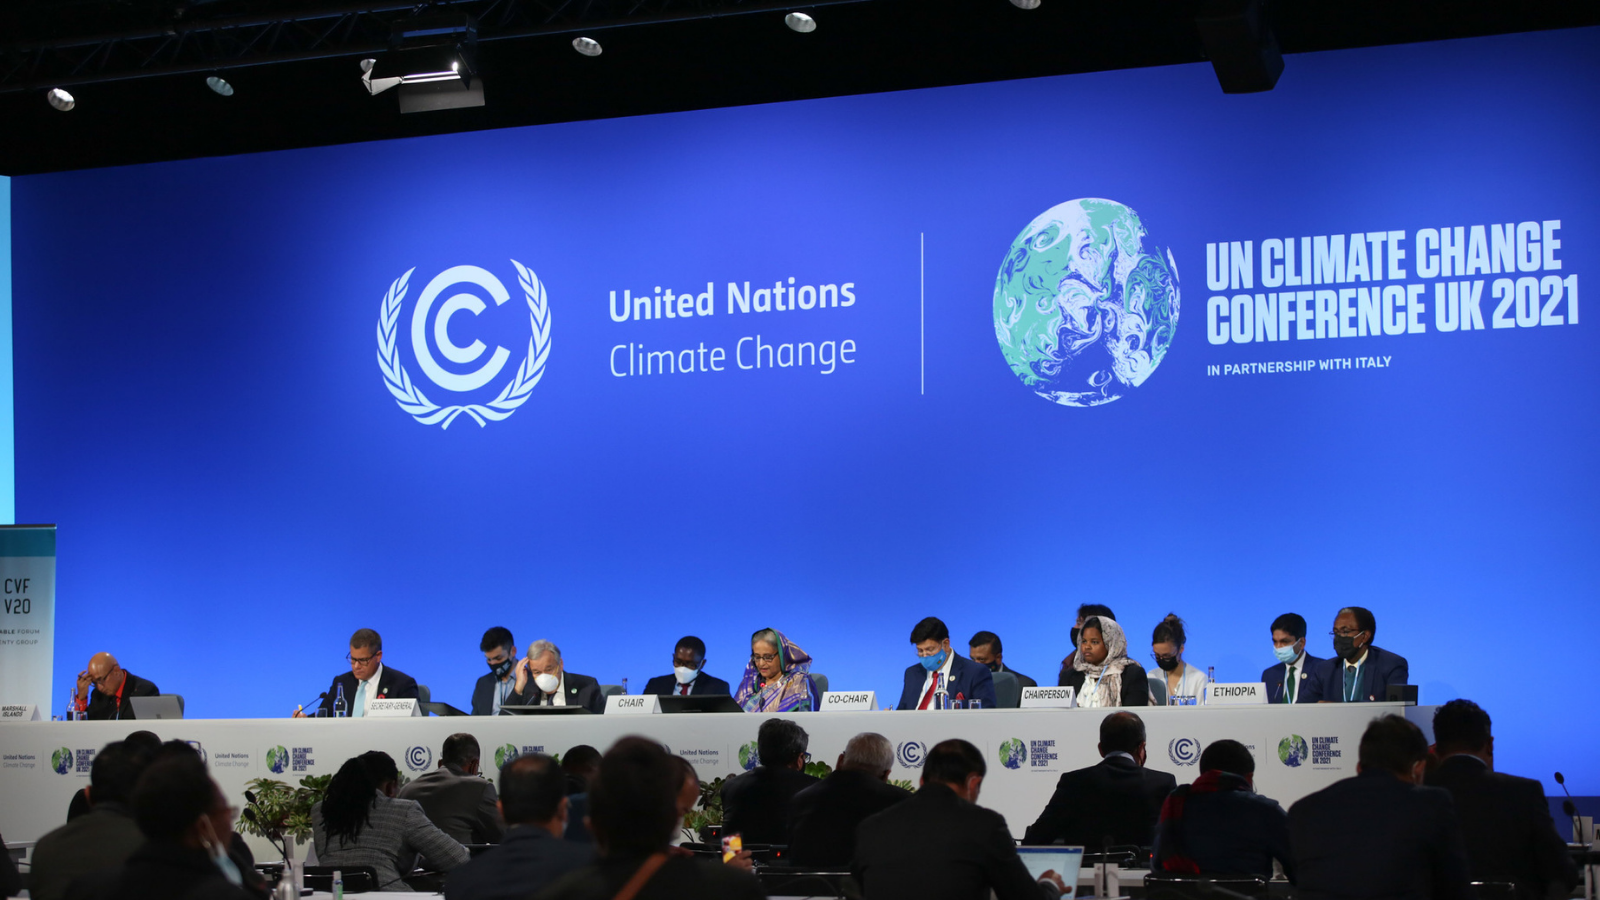 COP26 negotiators finalizing agreements to ensure the world’s countries are on track to meet the climate agreements.